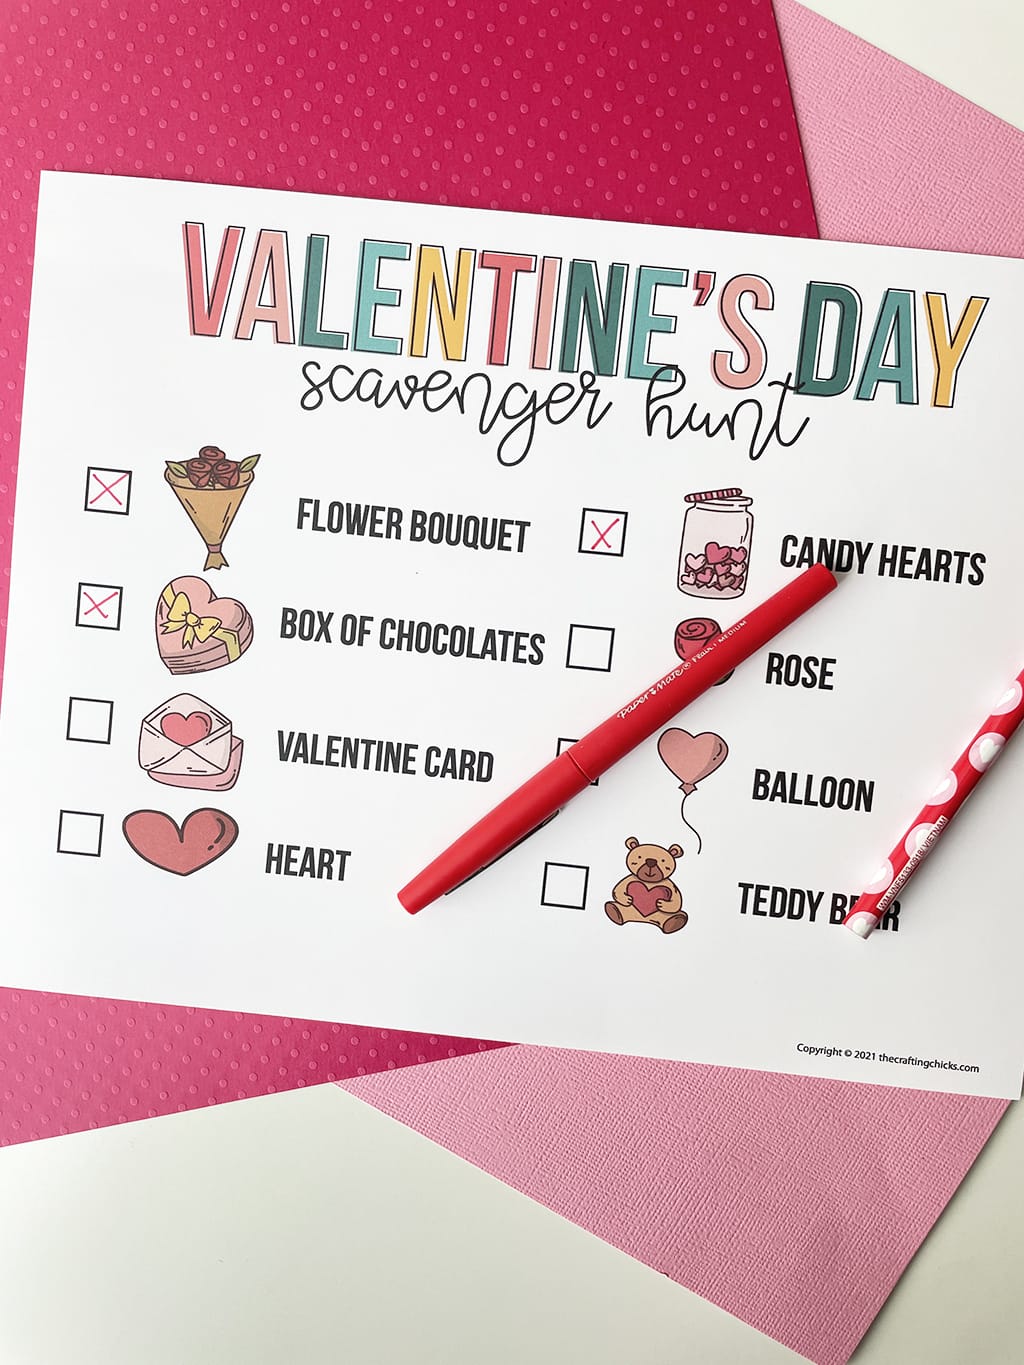 Valentine's Day Scavenger Hunt - The Crafting Chicks